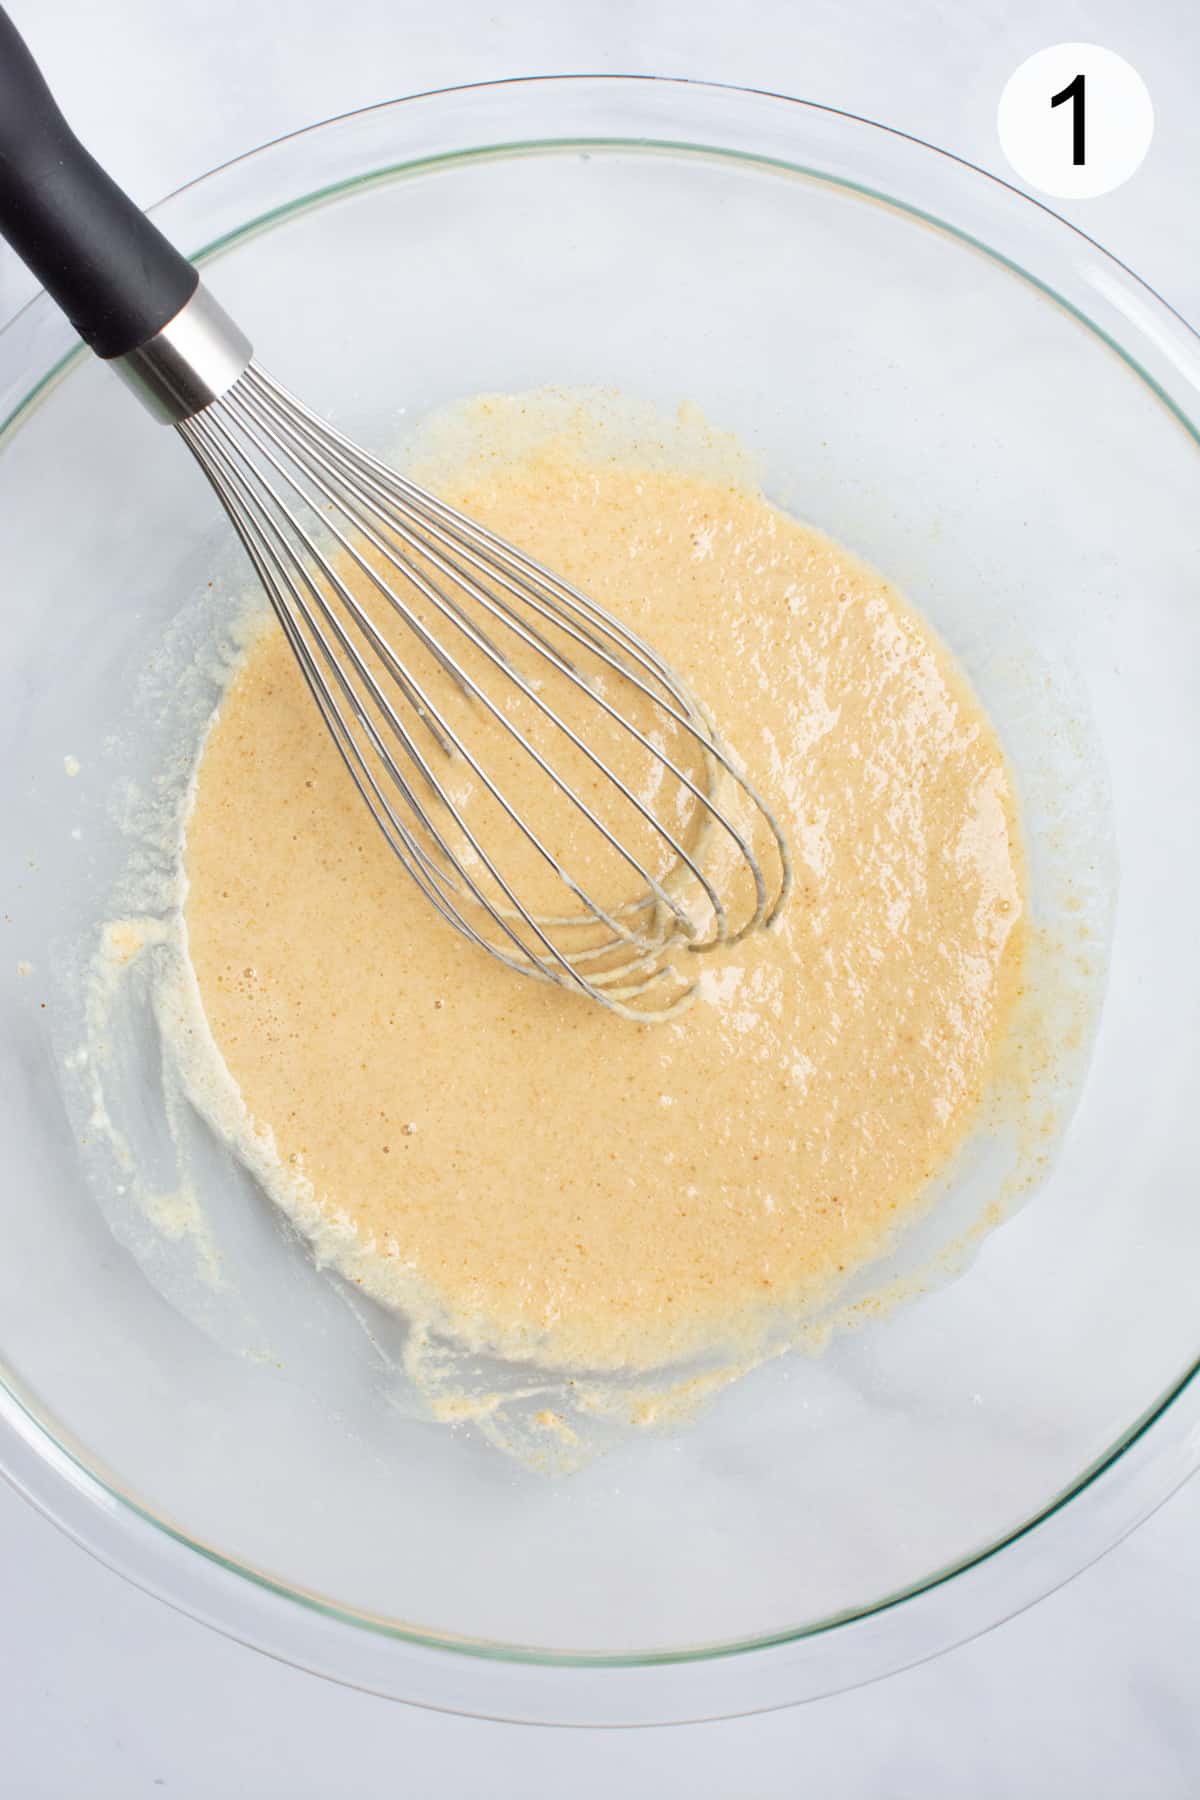 Batter mixed with a whisk in a glass bowl.